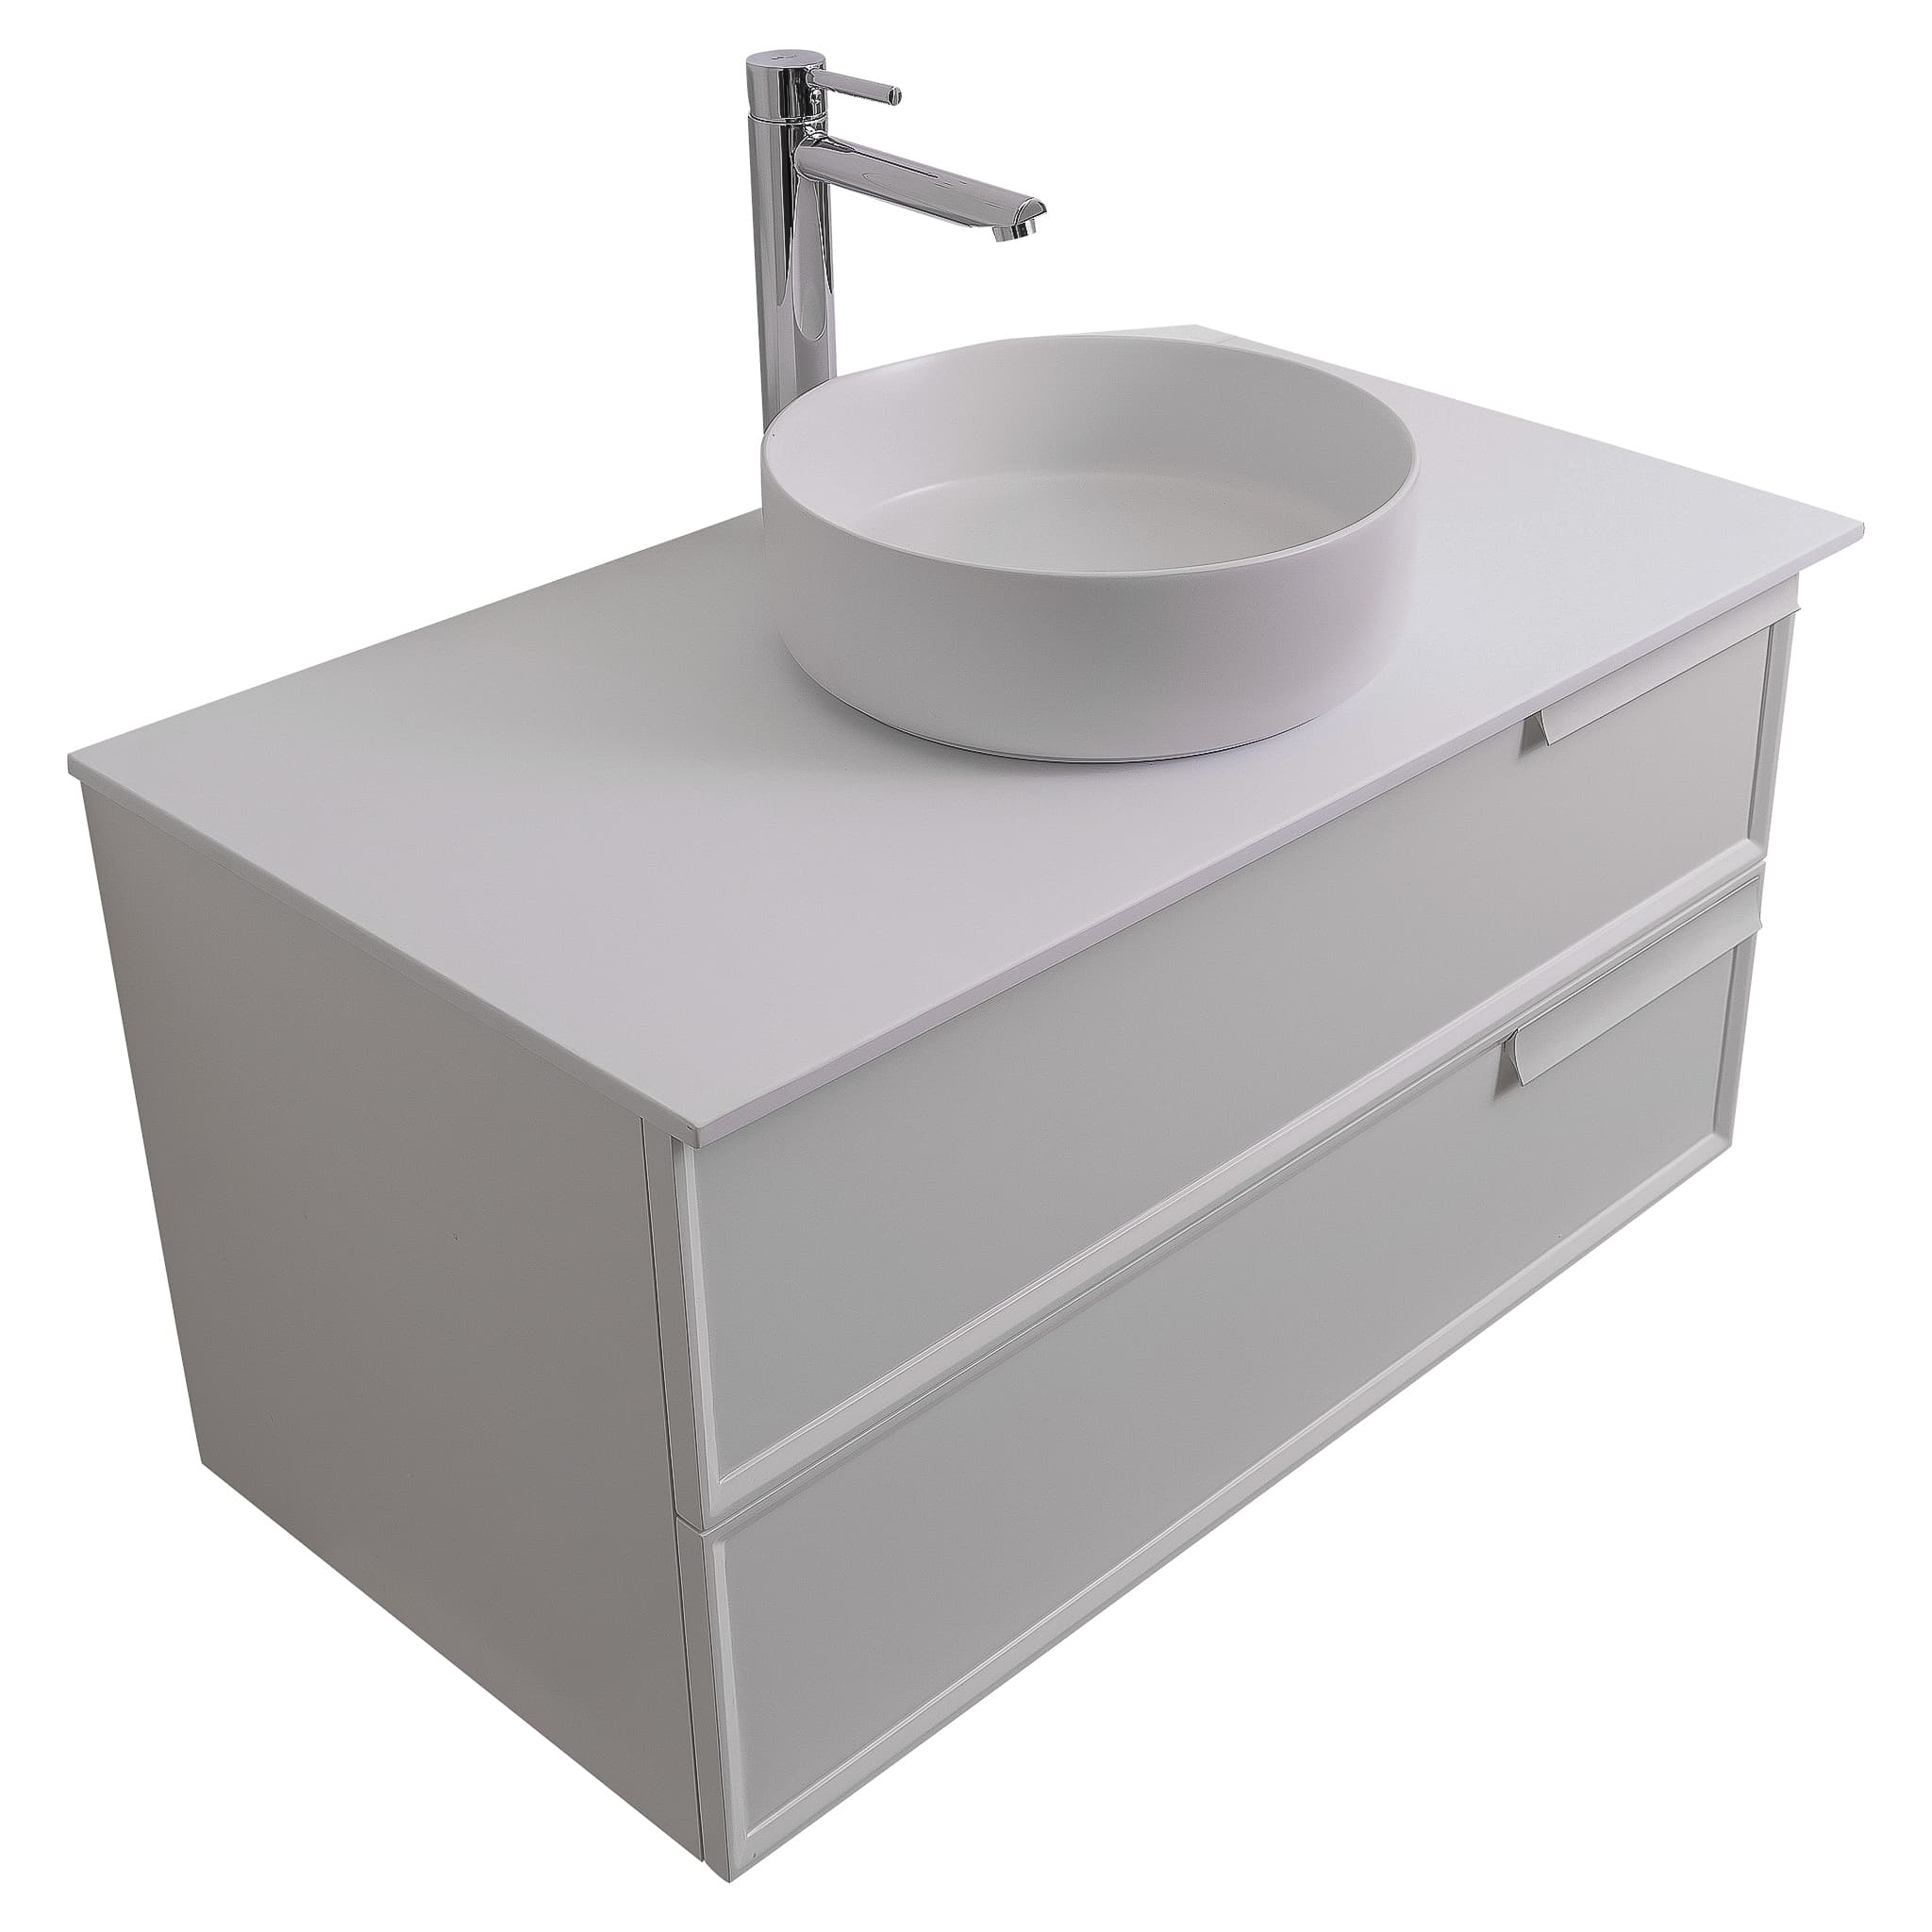 Garda 31.5 Matte White Cabinet, Ares White Top and Ares White Ceramic Basin, Wall Mounted Modern Vanity Set